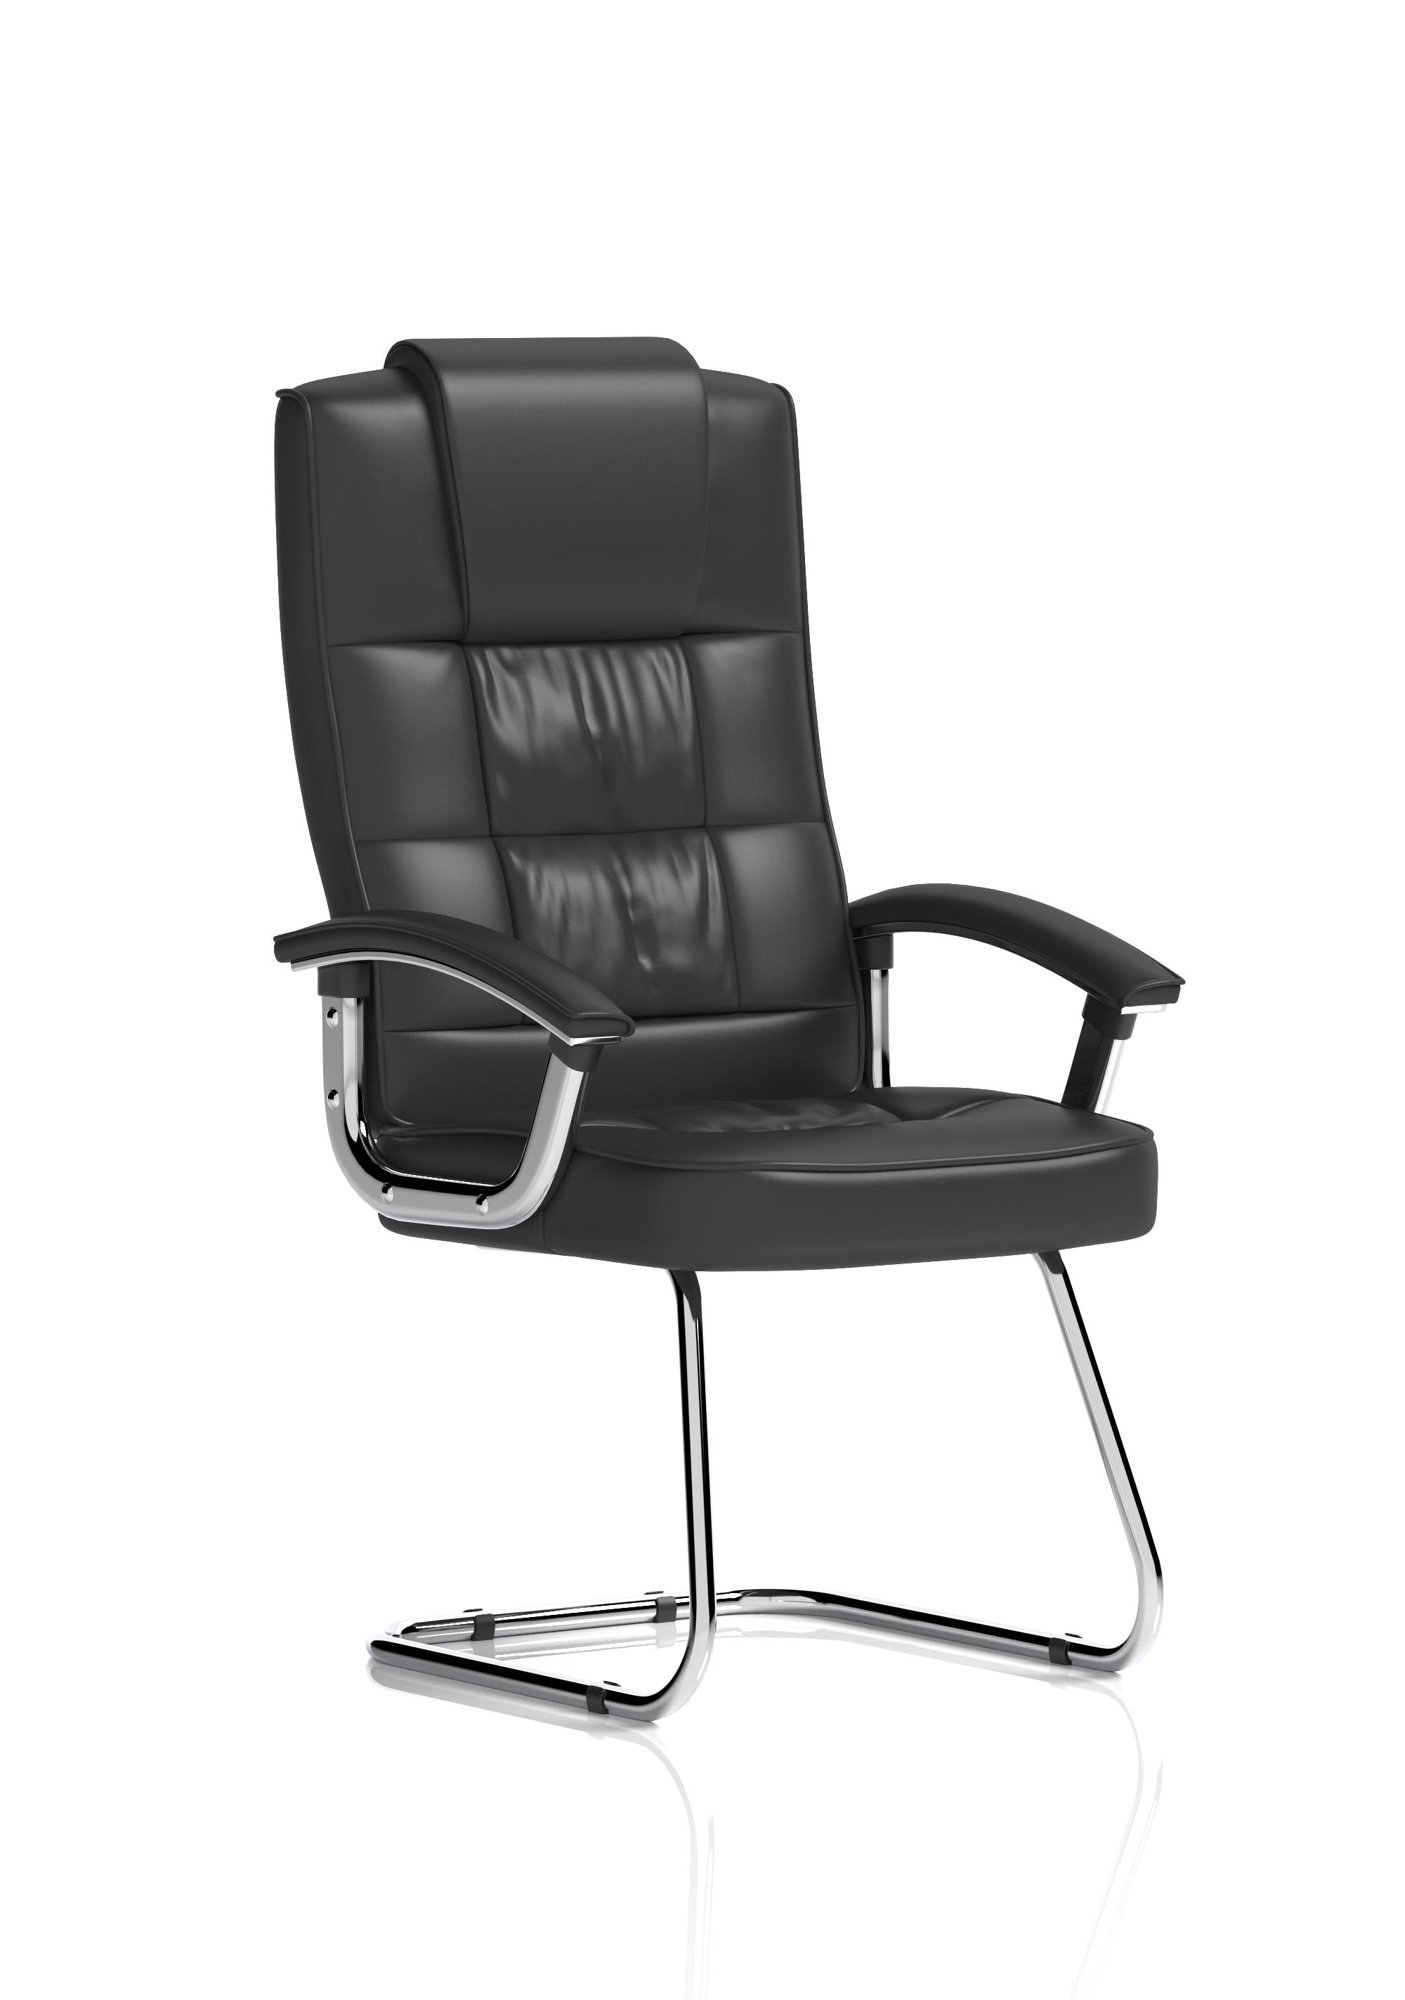 Moore Deluxe Cantilever Visitor Chair Black Leather With Arms KC0152